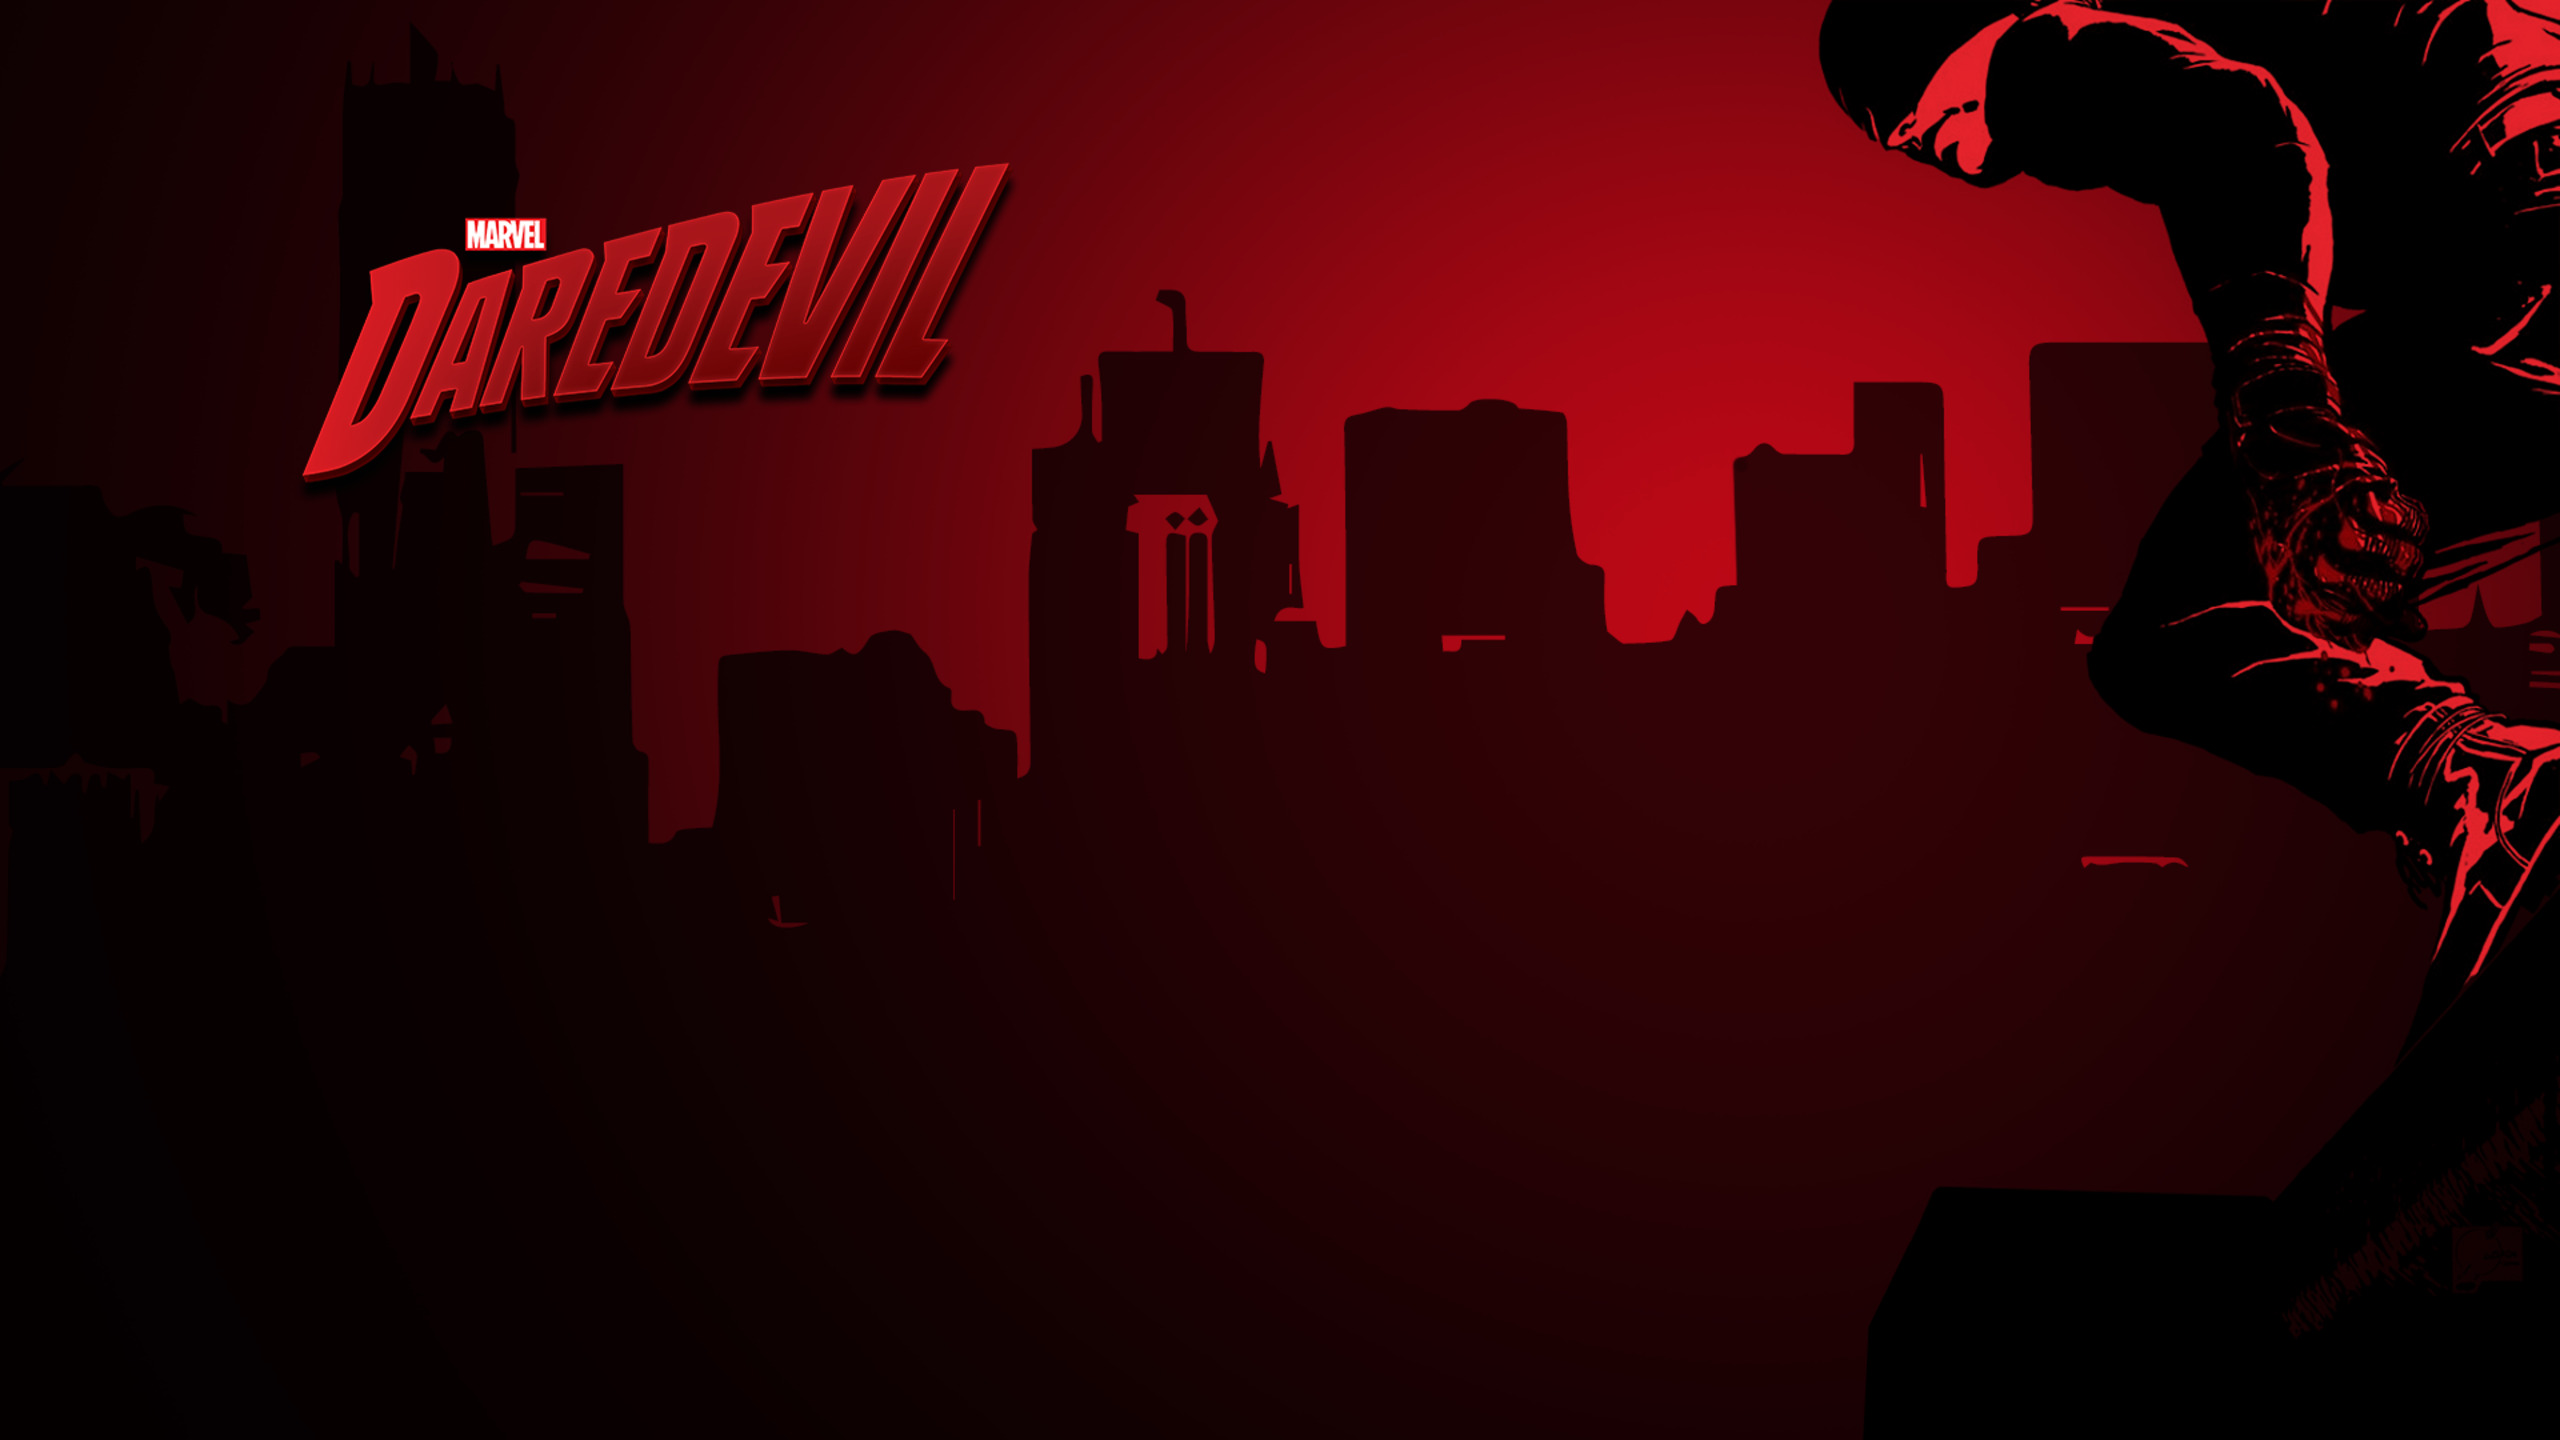 Marvel Daredevil Tv Show 1440P Resolution HD 4k Wallpaper, Image, Background, Photo and Picture